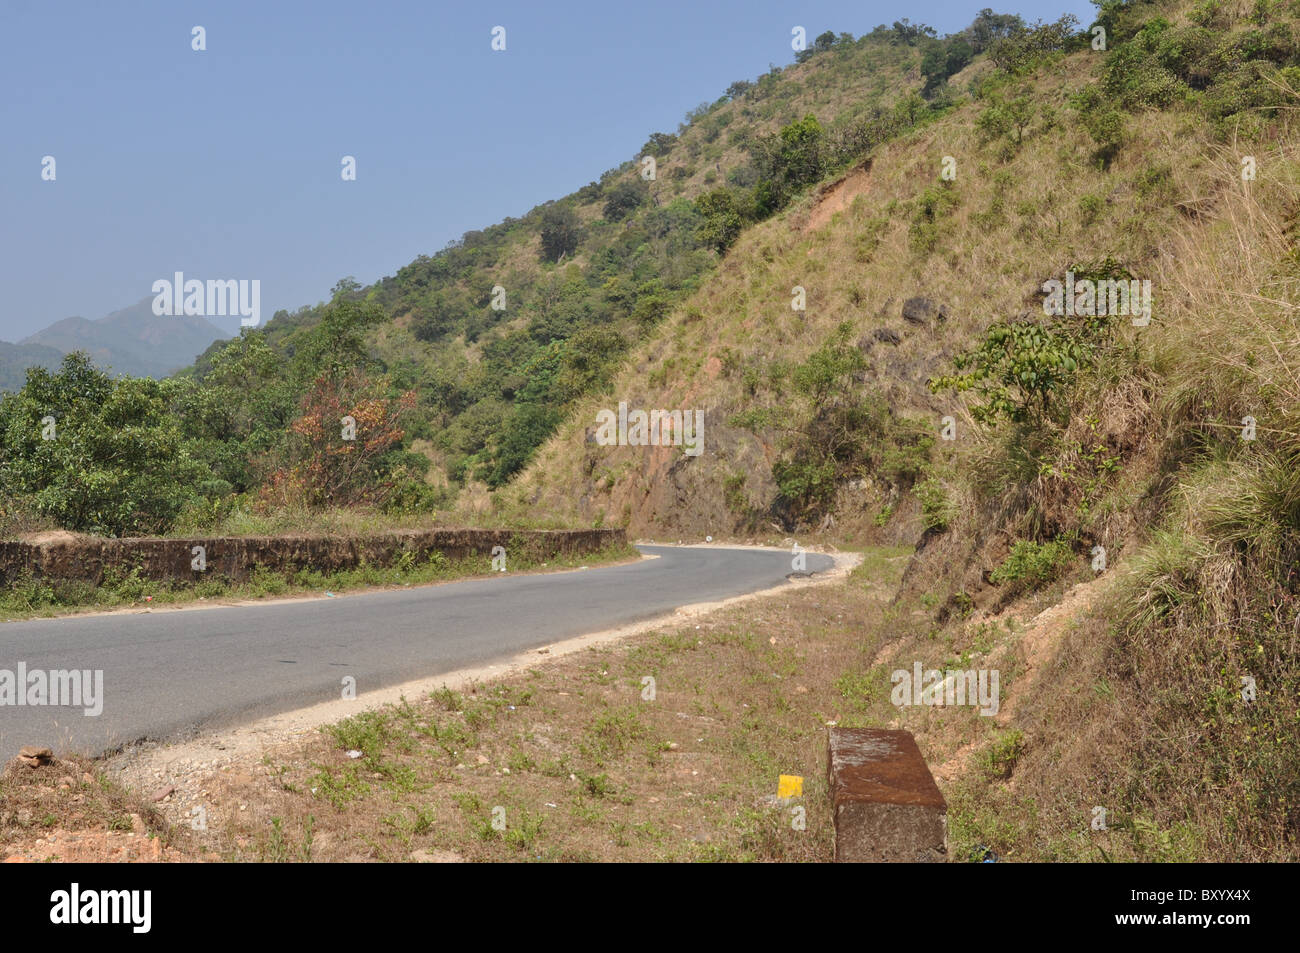 A road cut into the hill side Stock Photo